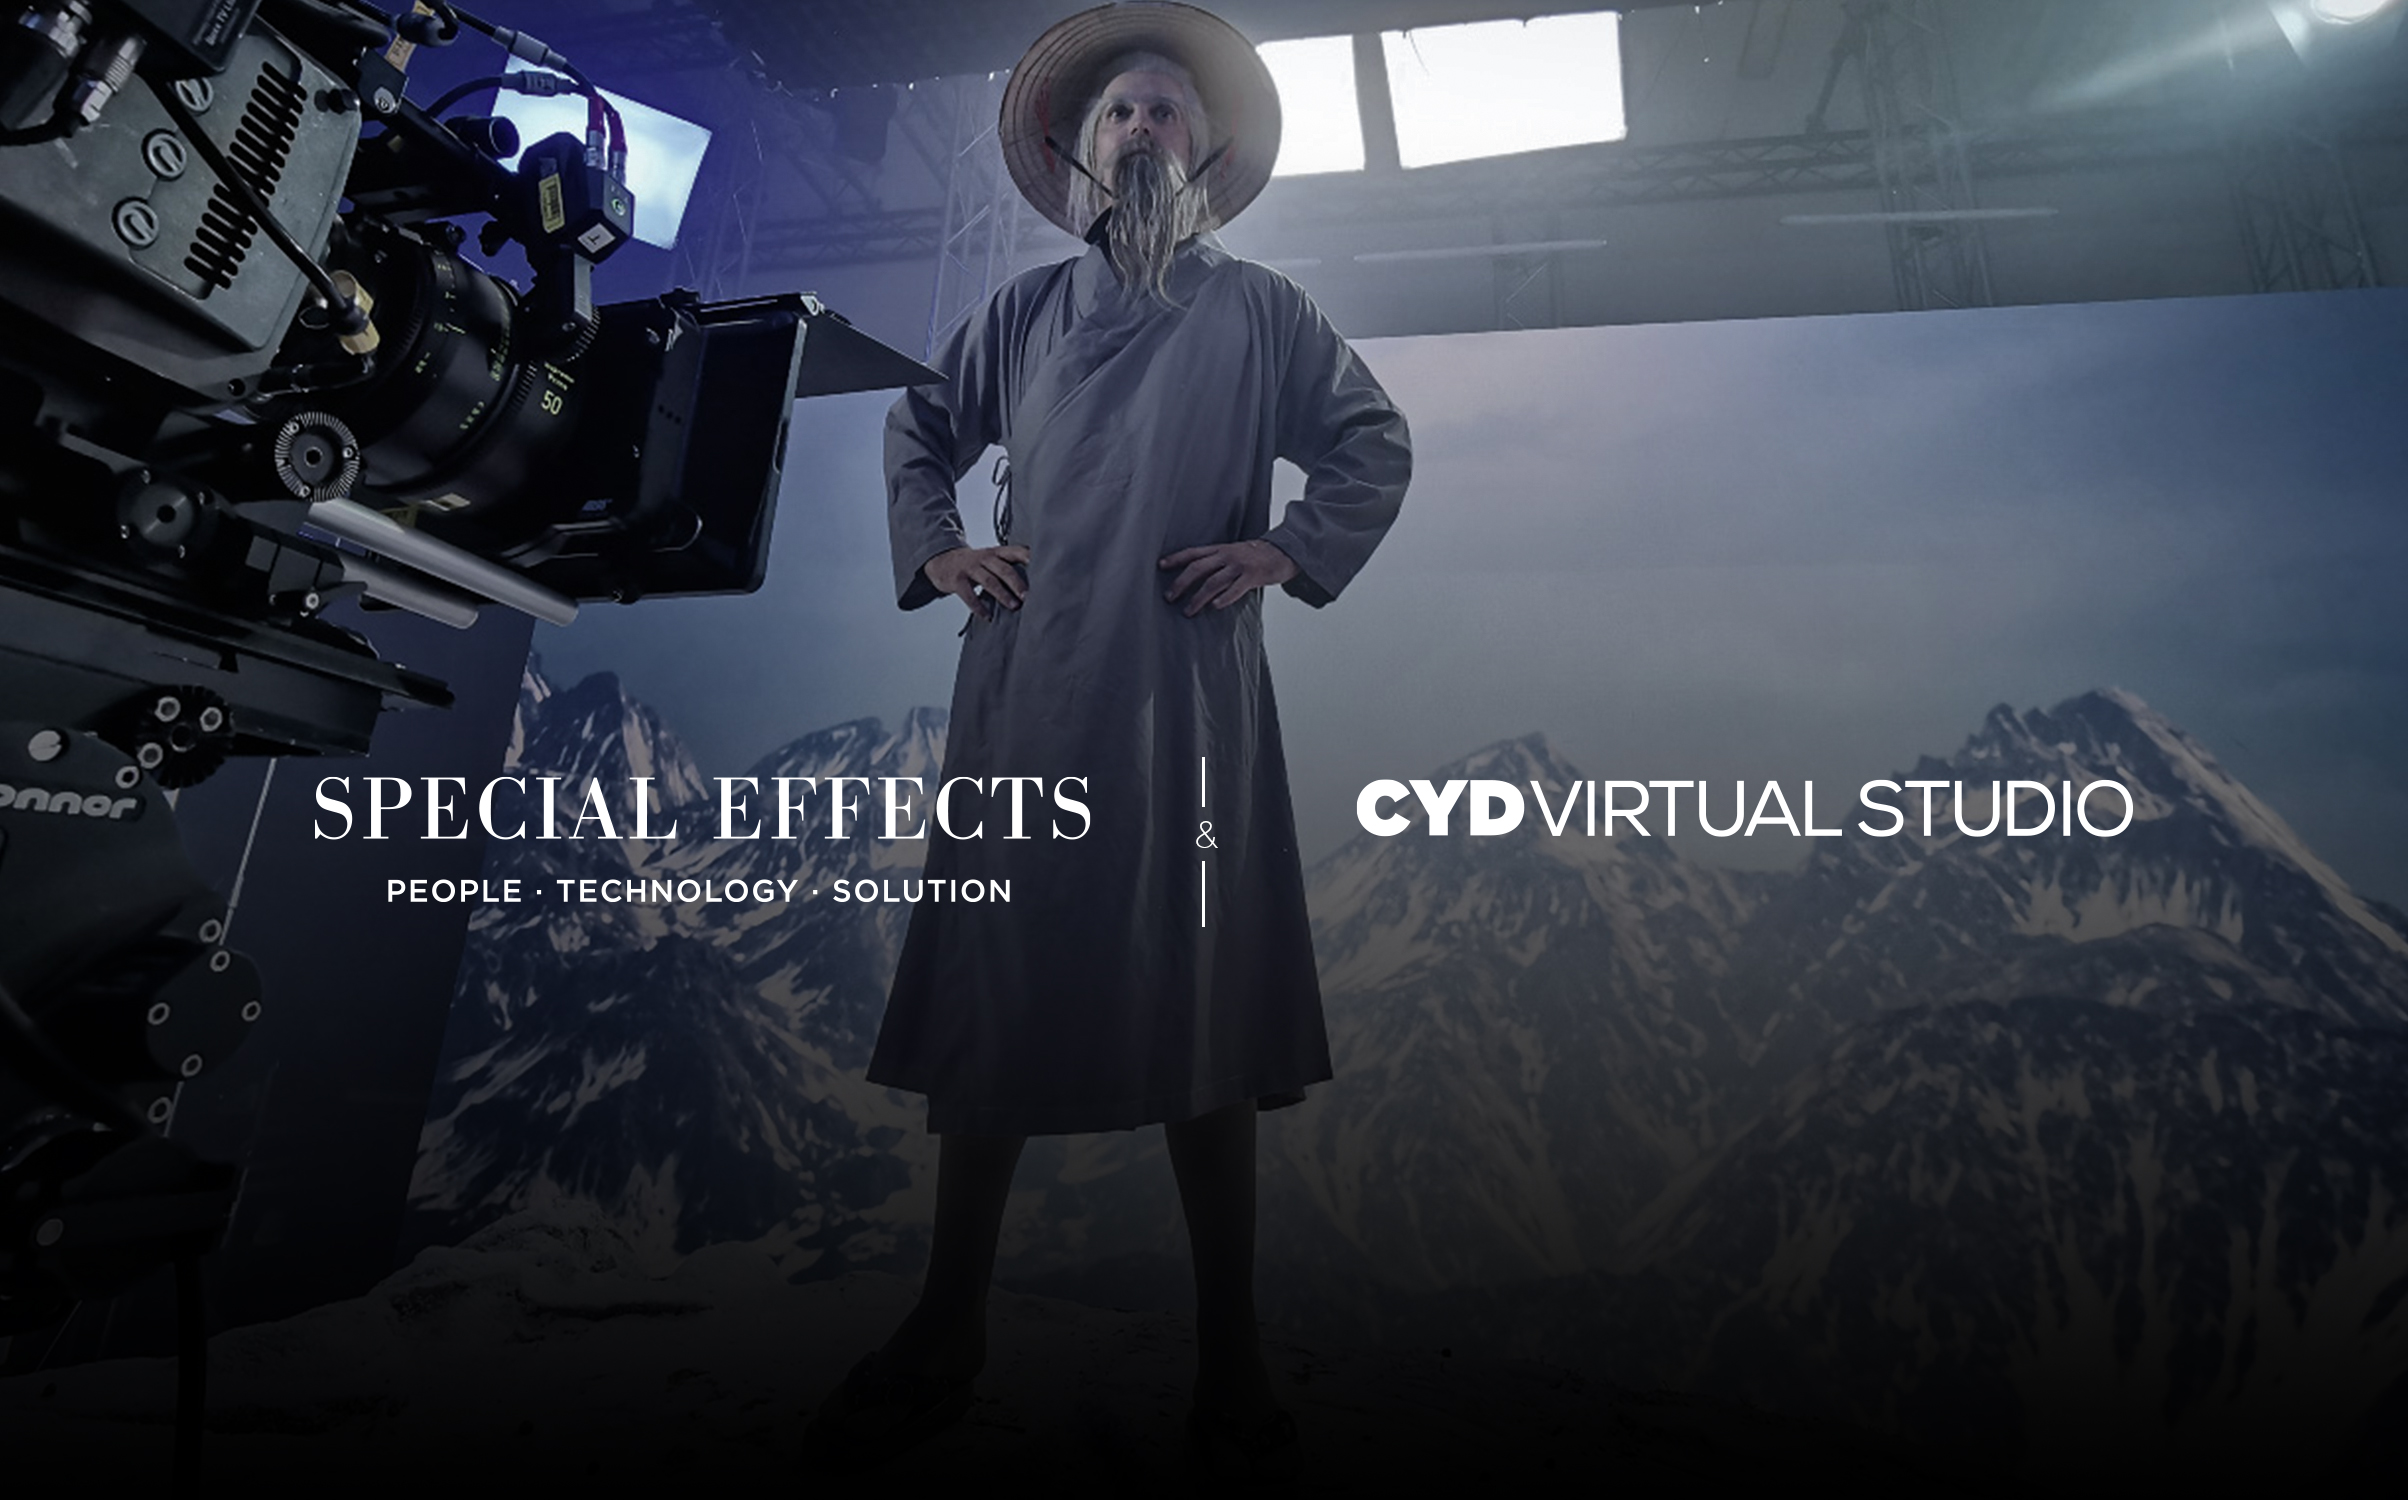 Special Effects Expands Portfolio With Virtual Studio